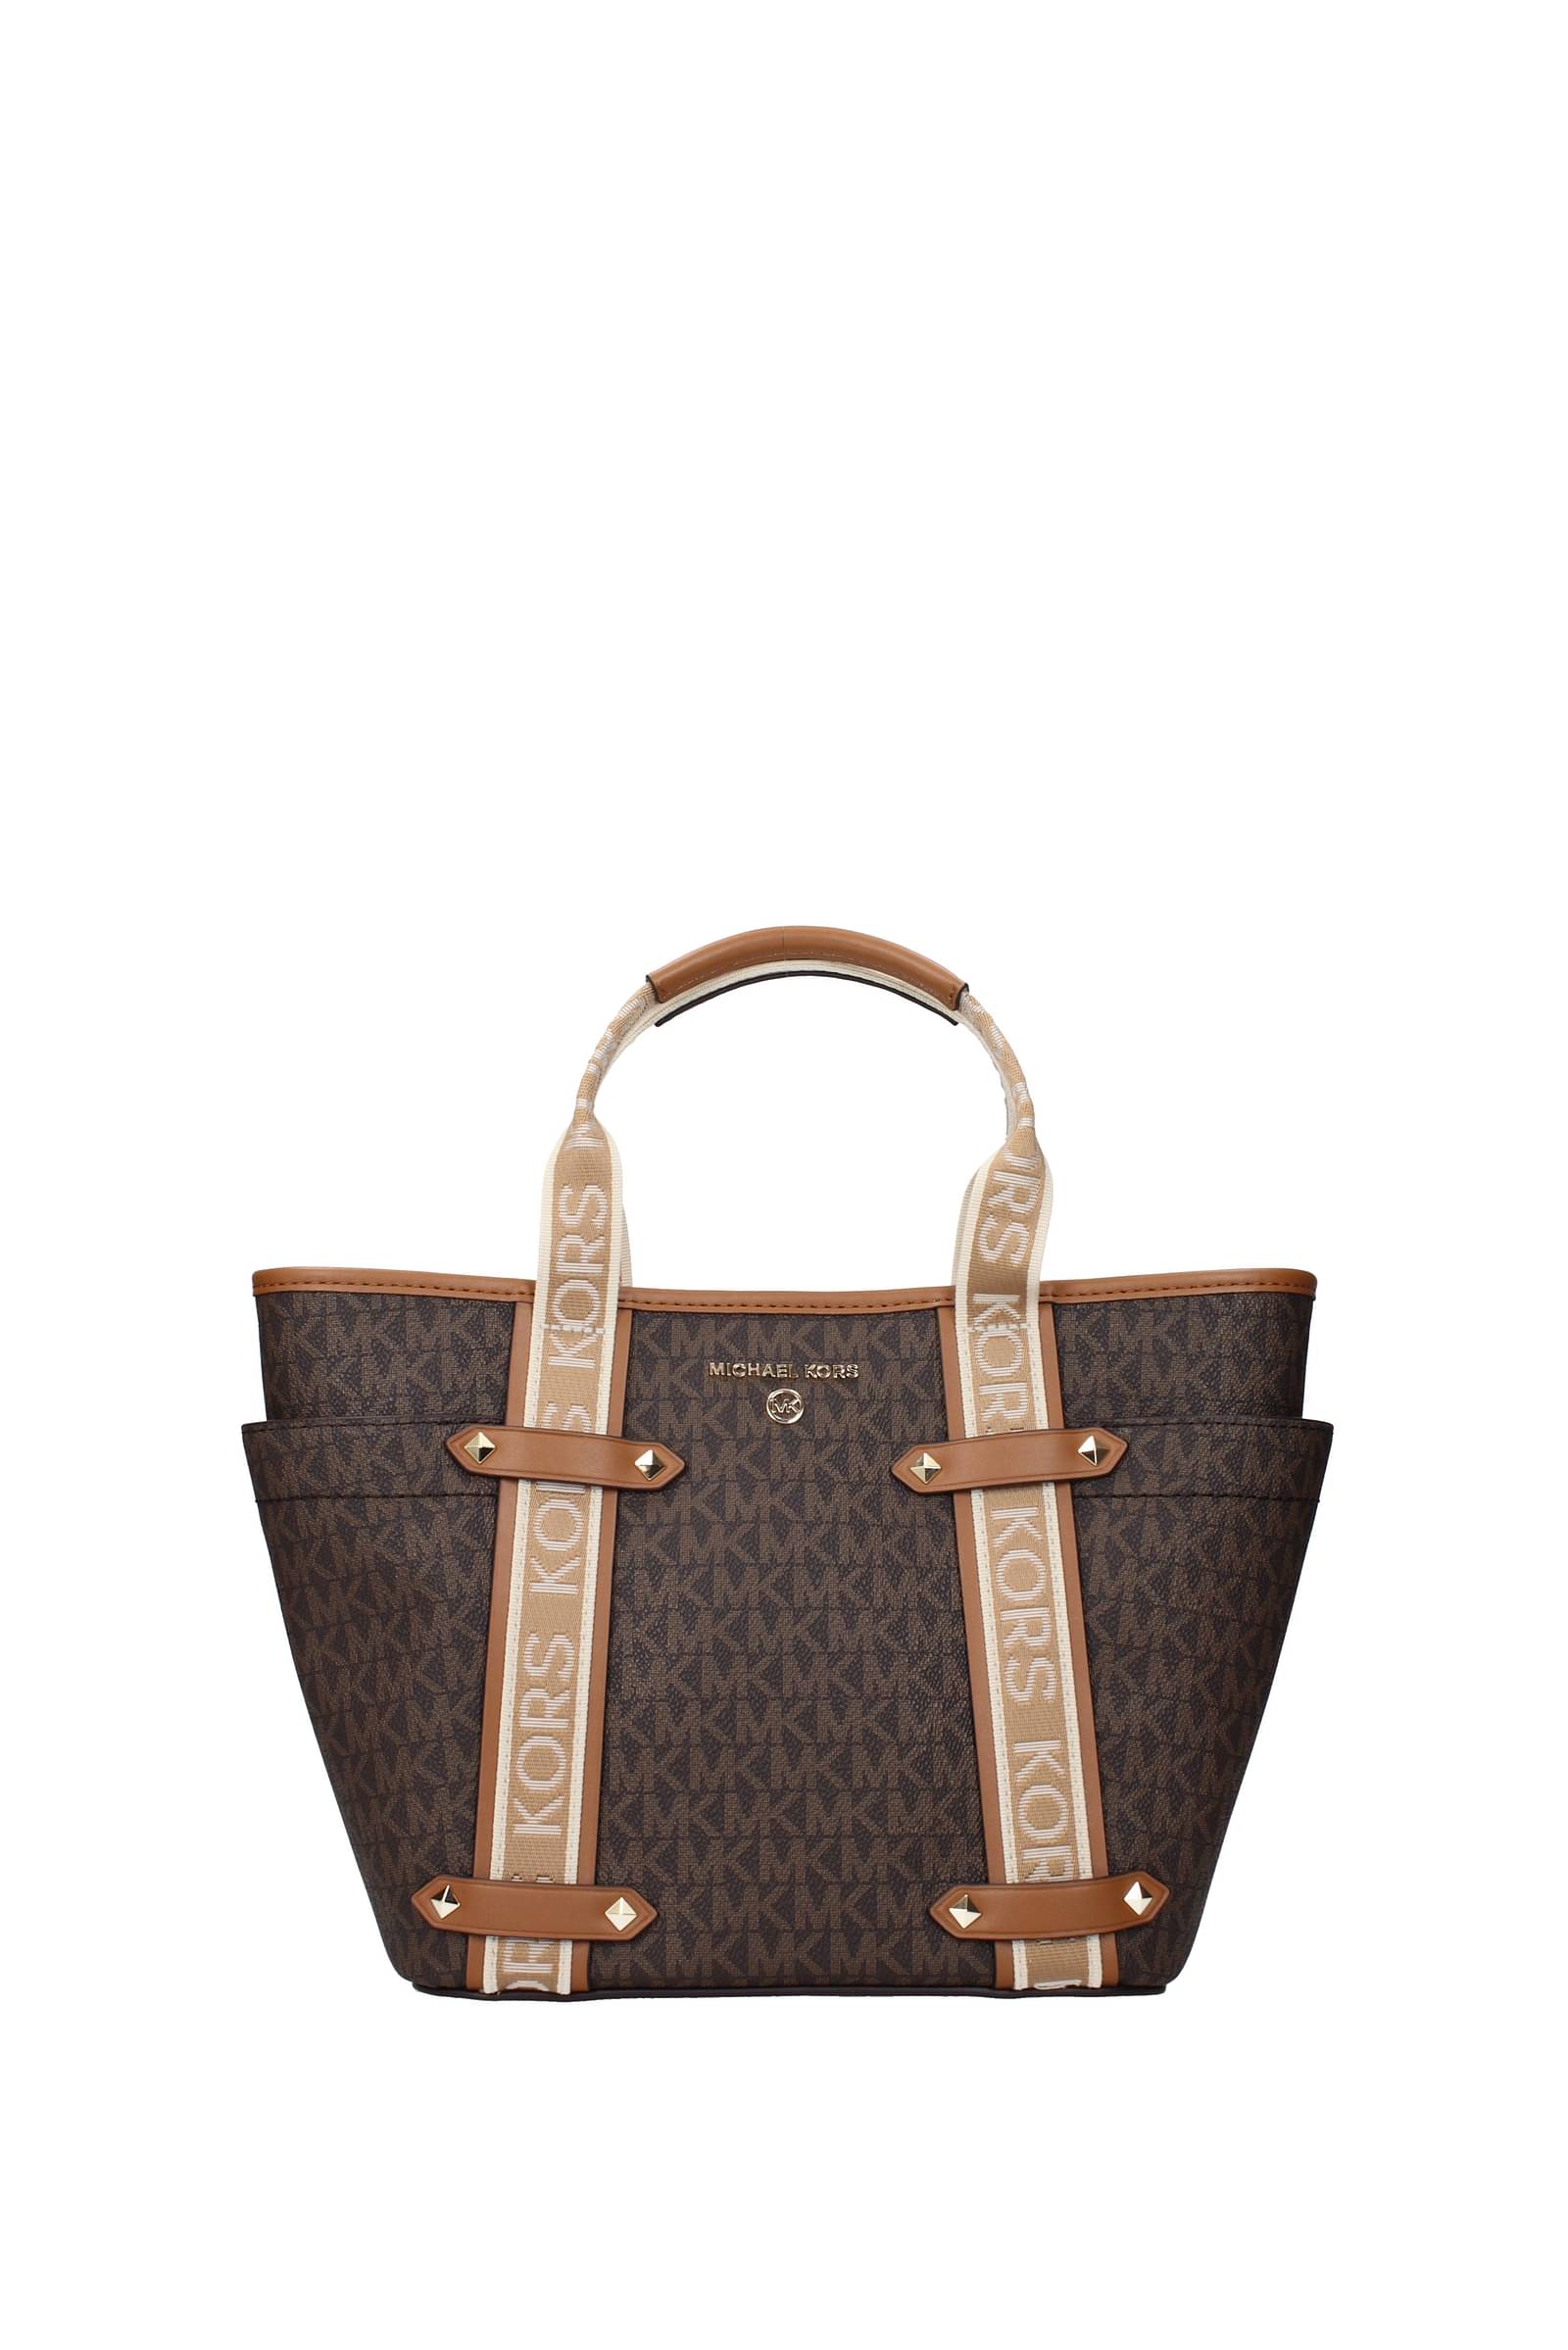 Michael Kors bags outlet up to 50 off